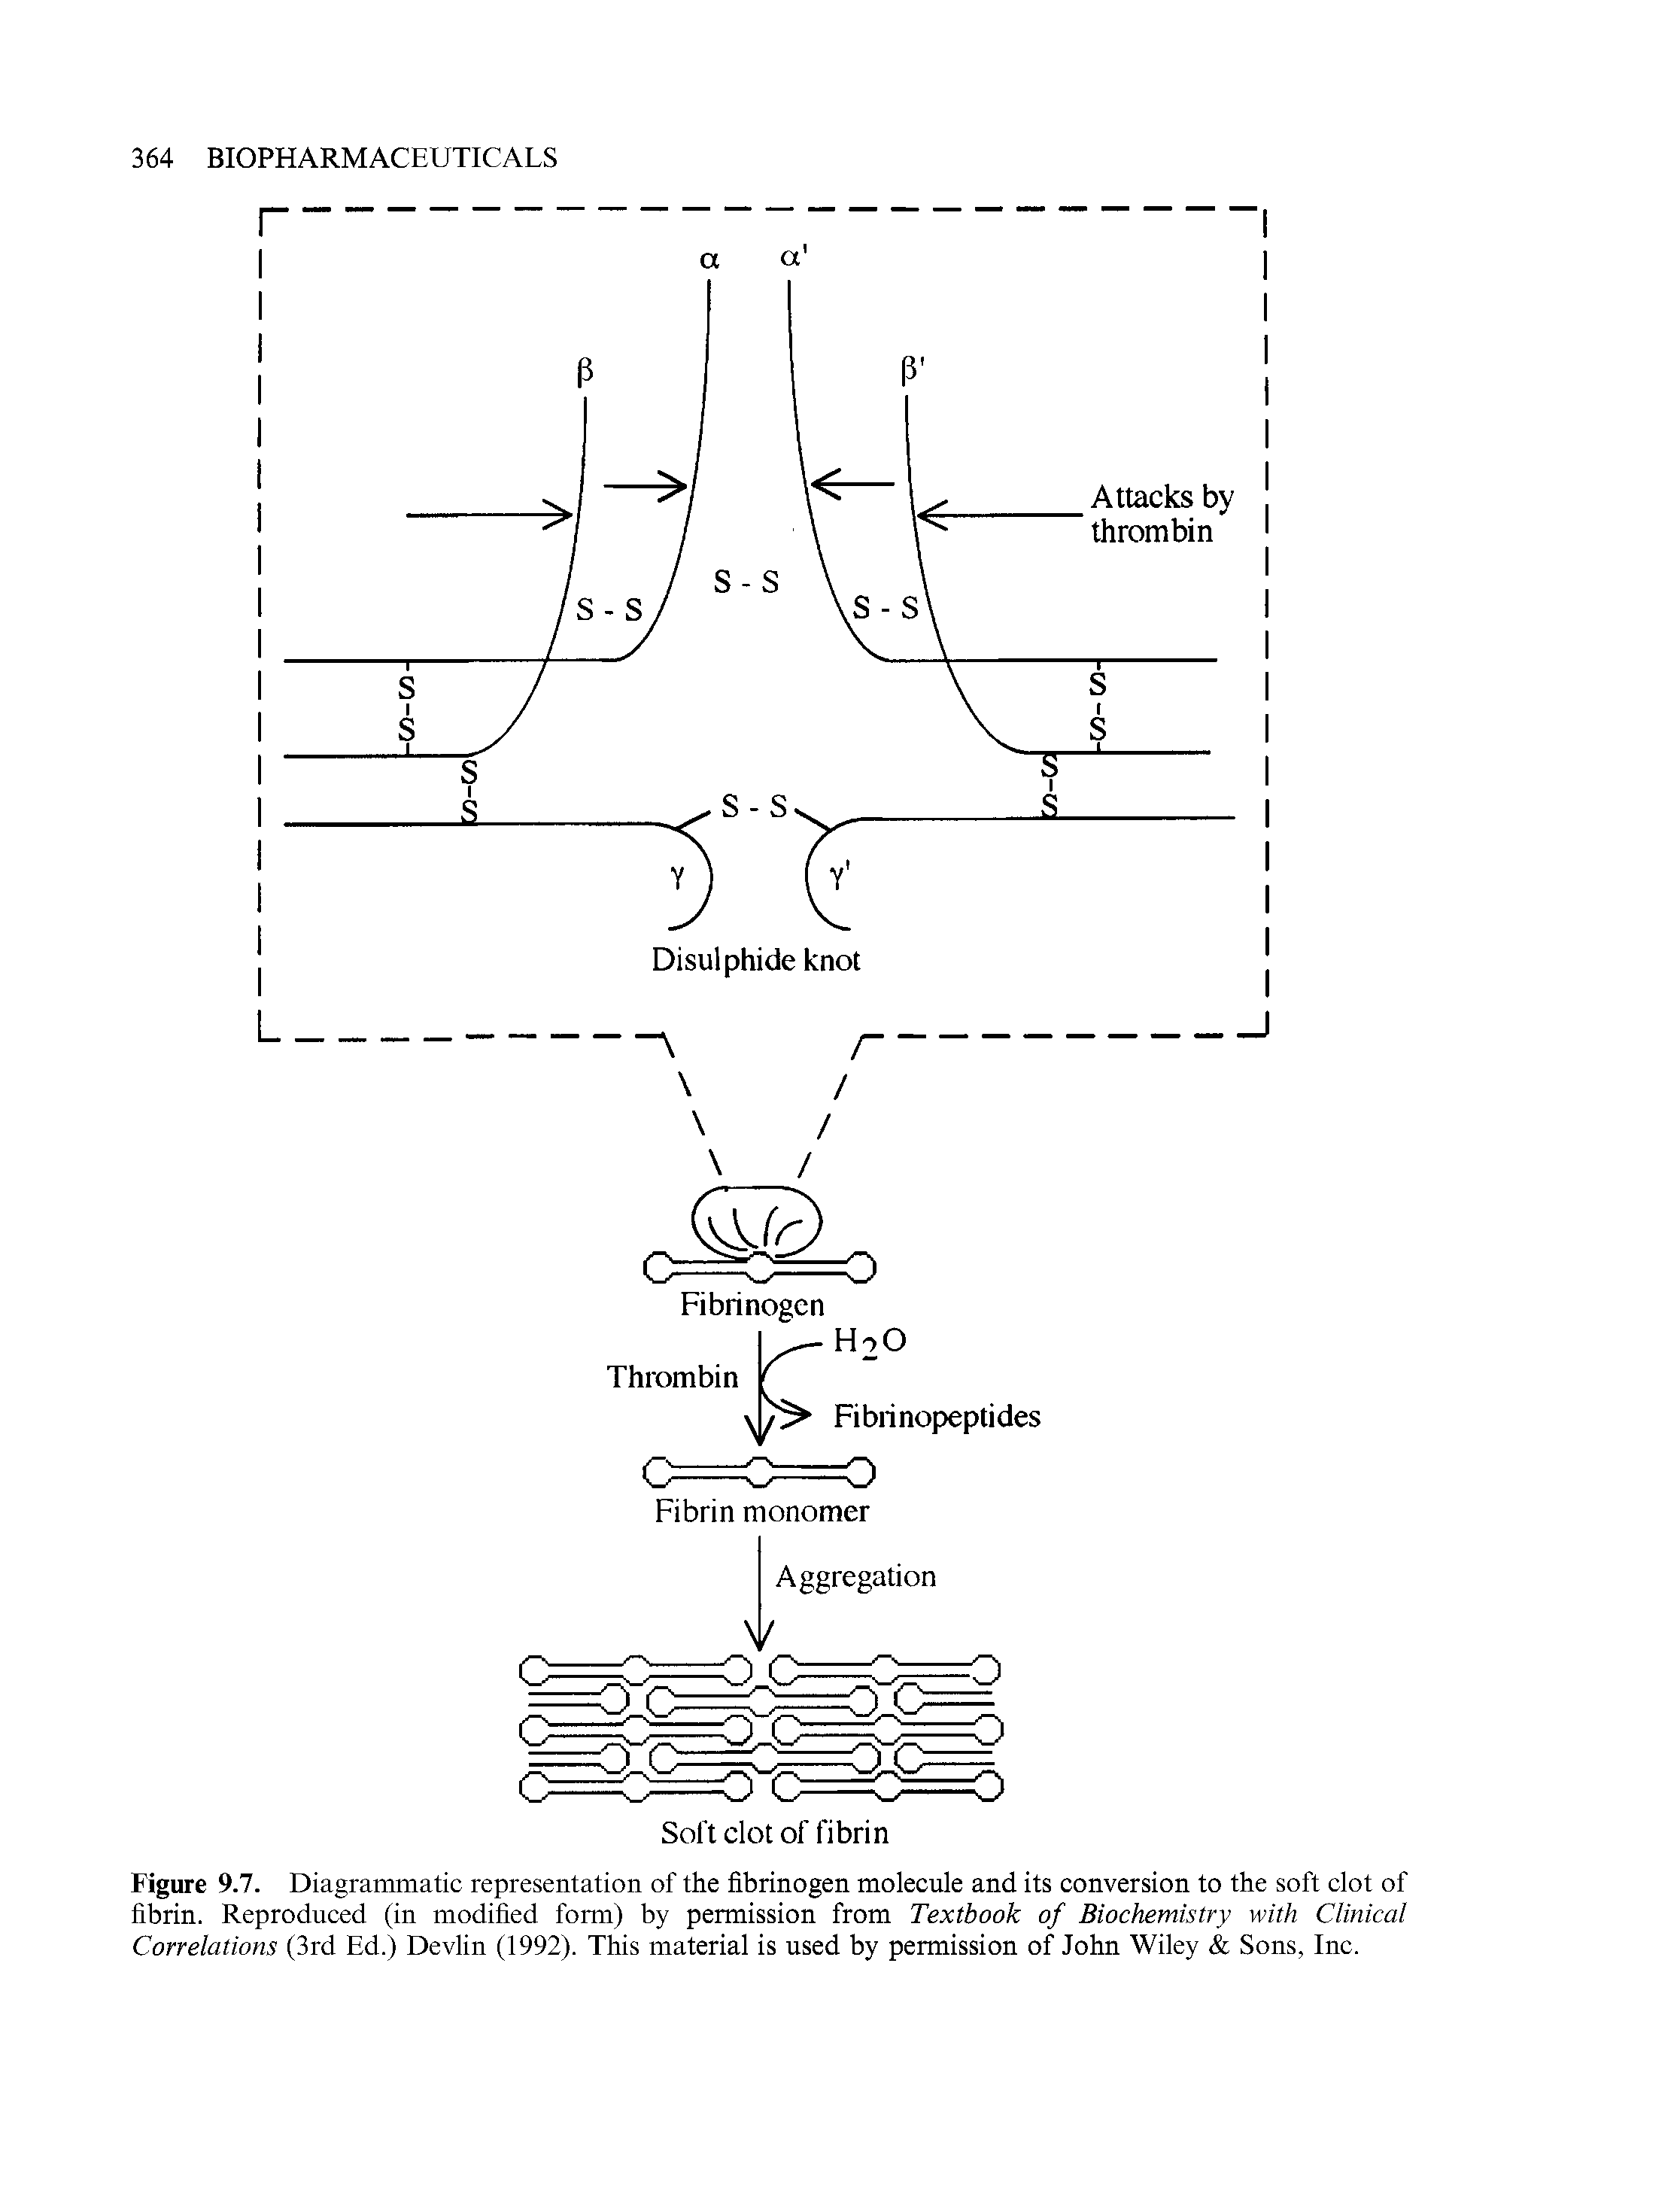 Figure 9.7. Diagrammatic representation of the fibrinogen molecule and its conversion to the soft clot of fibrin. Reproduced (in modified form) by permission from Textbook of Biochemistry with Clinical Correlations (3rd Ed.) Devlin (1992). This material is used by permission of John Wiley Sons, Inc.